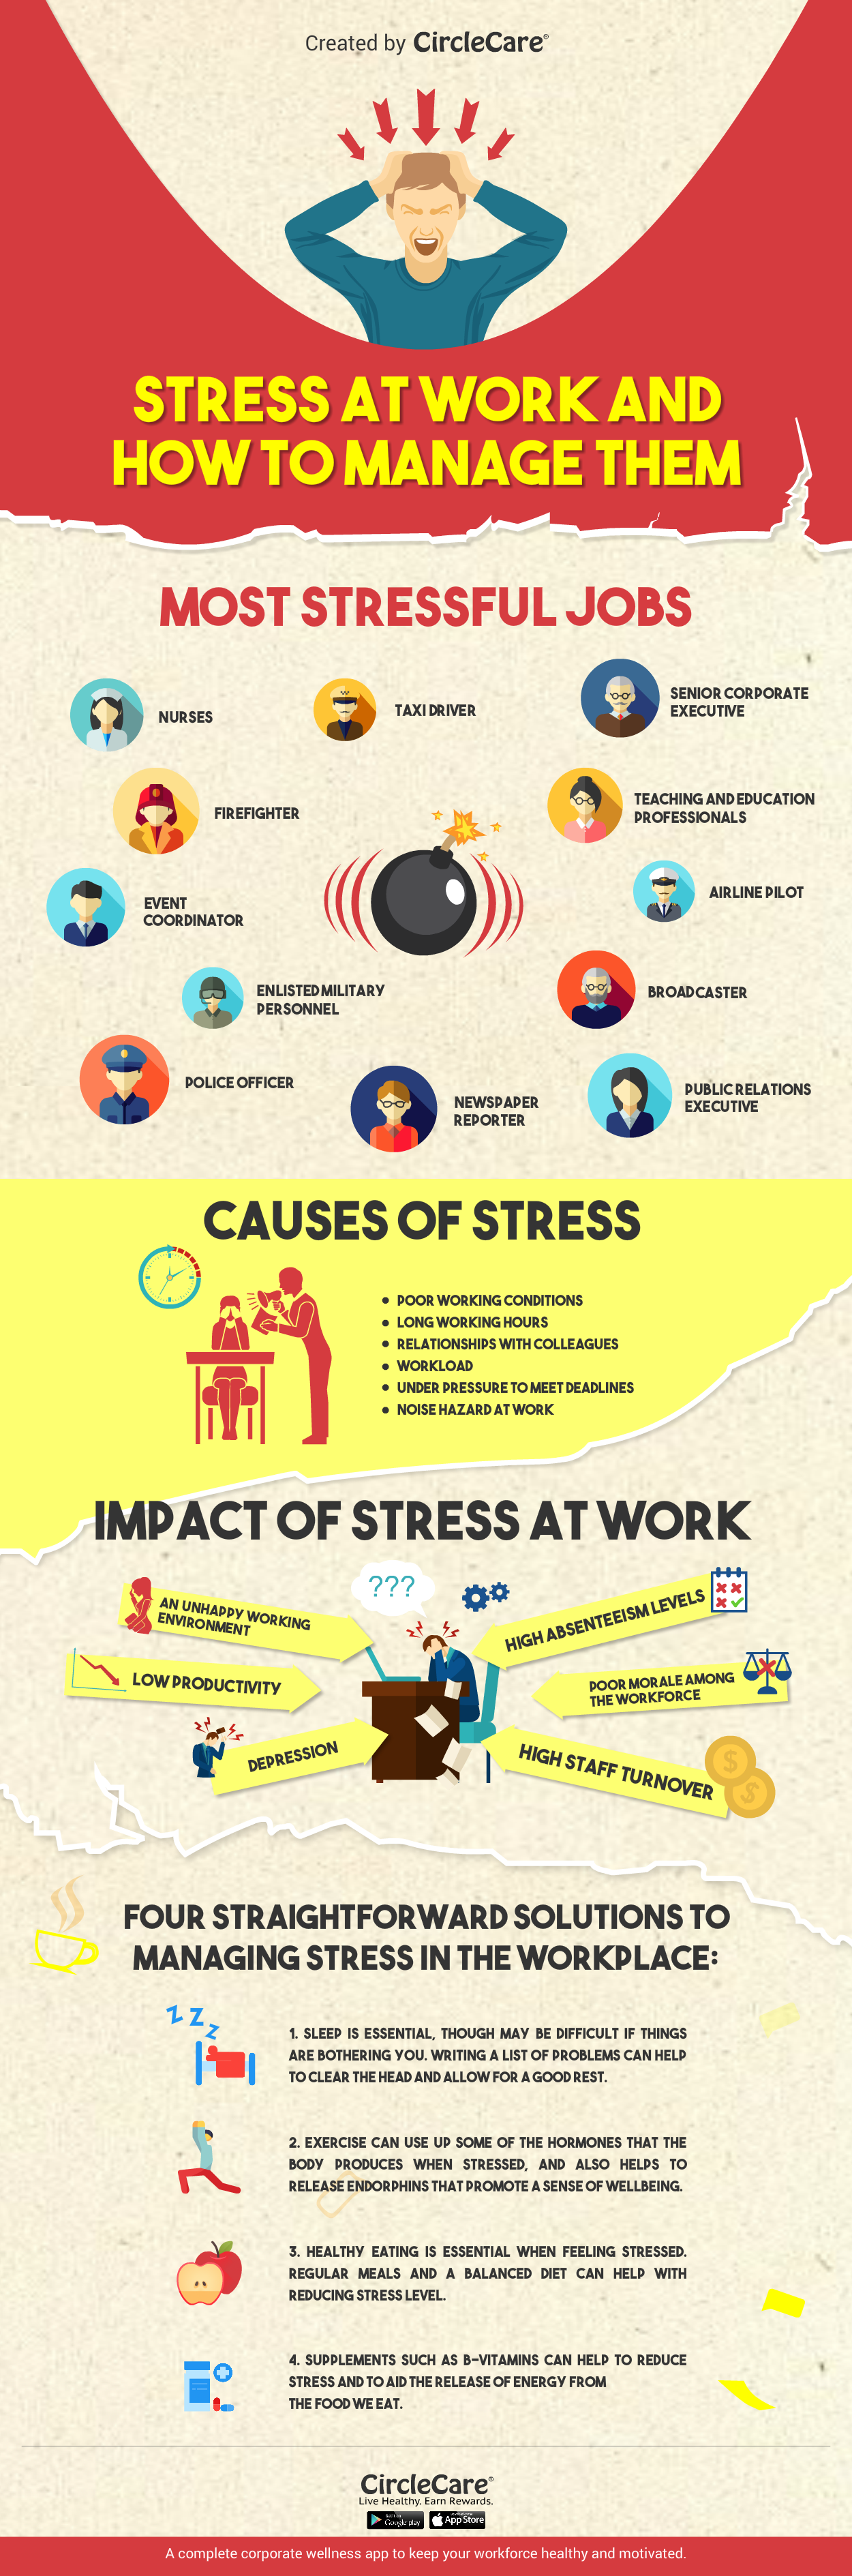 Most stressful jobs infographic